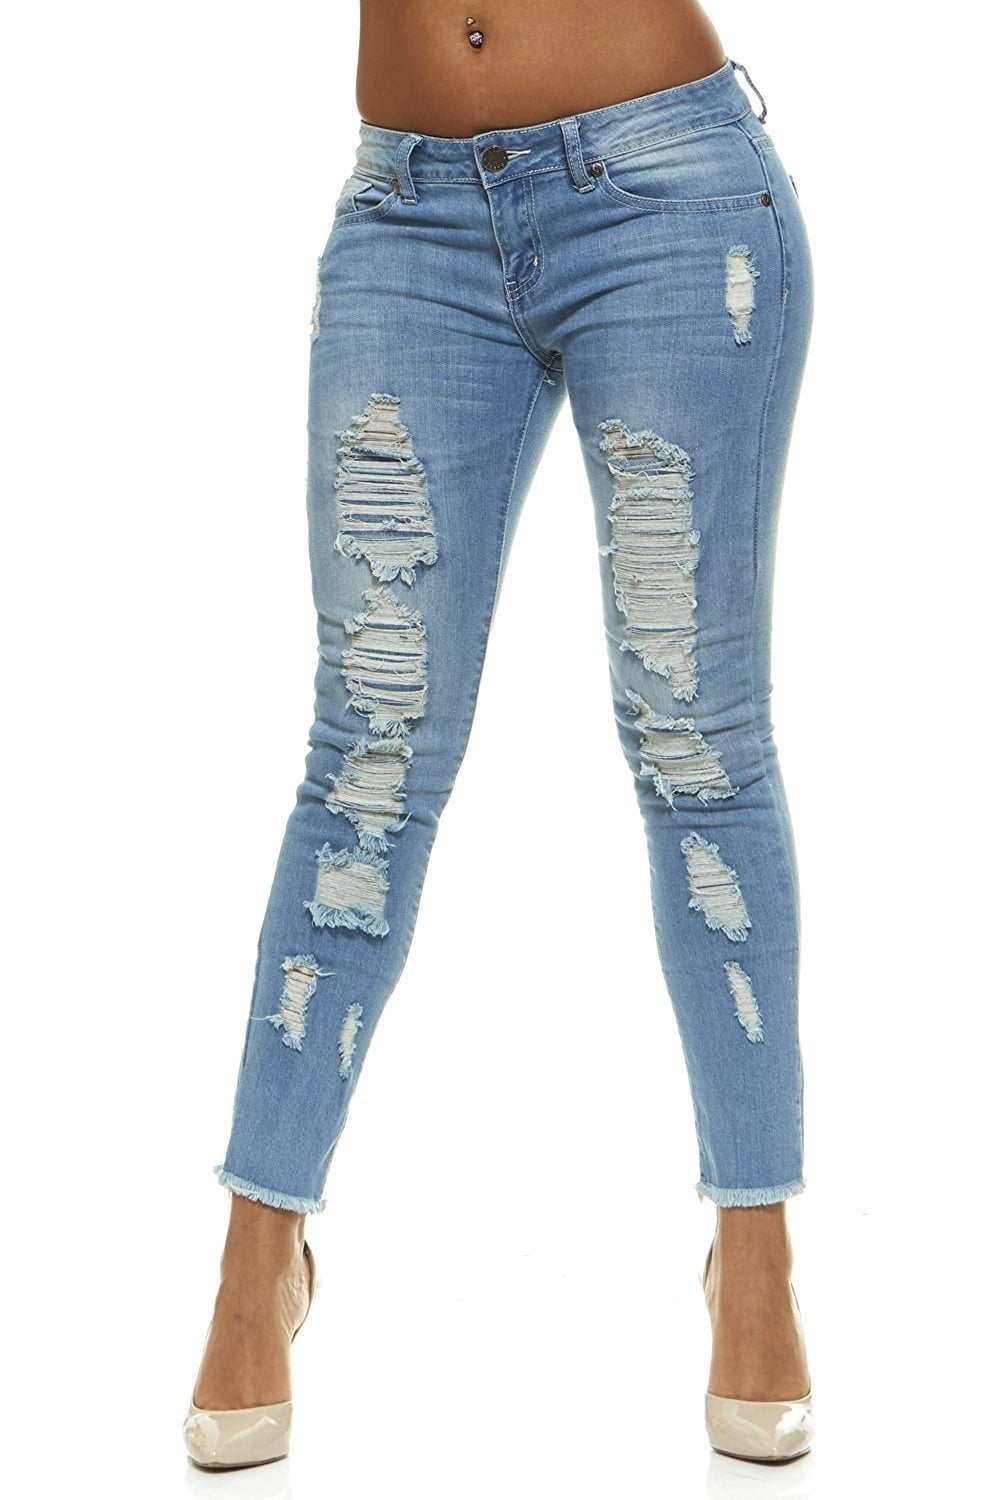 Classic Skinny Jeans for Teen Girls Slim Fit Stretch Stone Washed Jeans ...